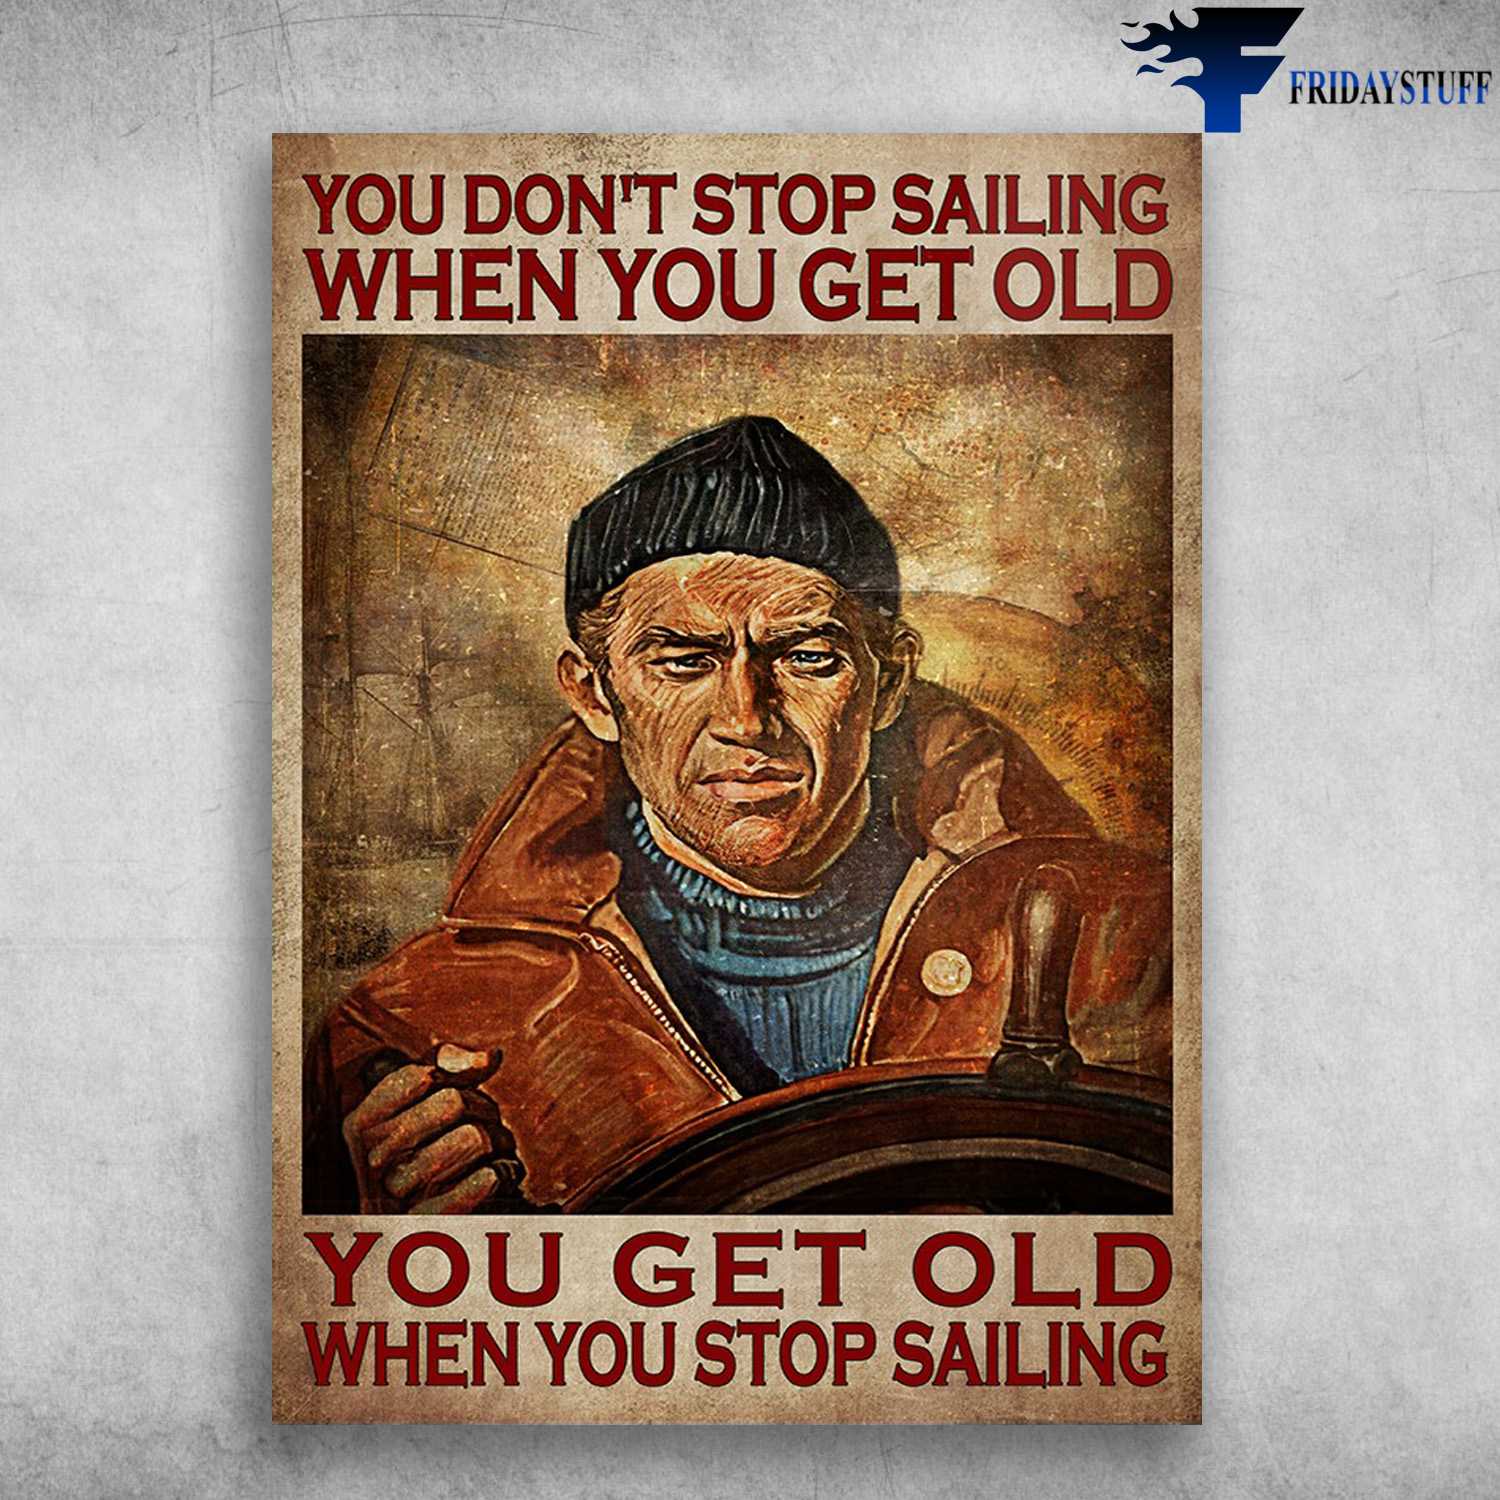 Sailor Guy - You Don't Stop Sailing When You Get Old, You Get Old When You Stop Sailing